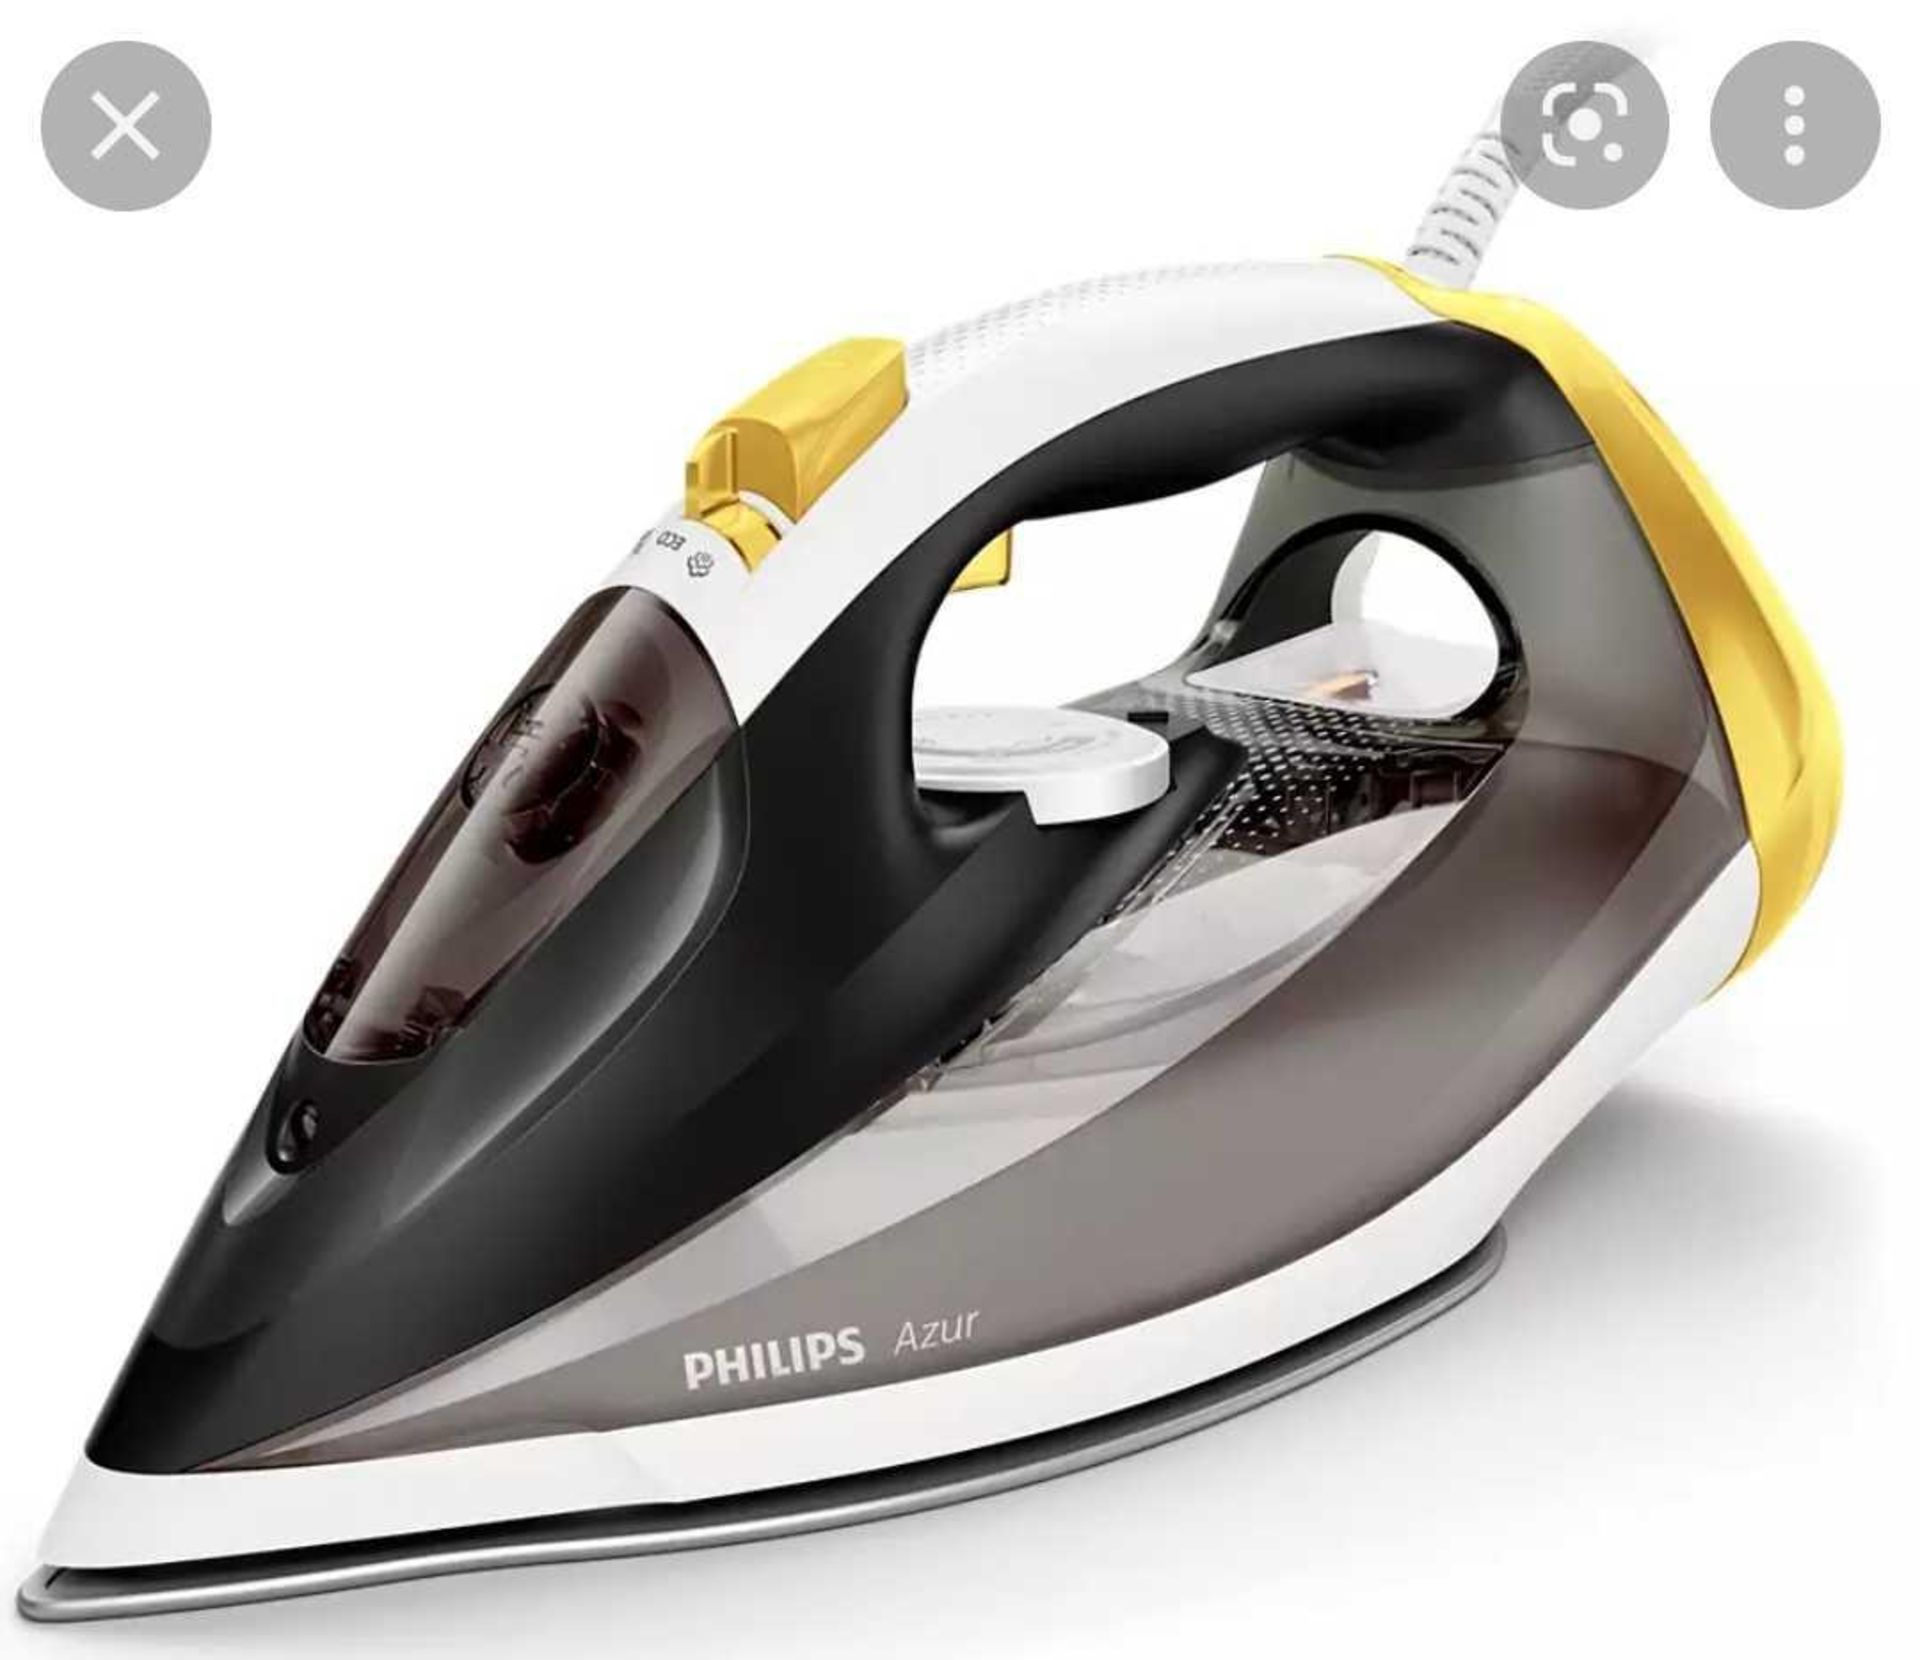 RRP £300 Lot To Contain X5 Items, X2 Tefal Free Move Air Steam Irons, X2 Philips Azur Steam Iron, Te - Image 2 of 3